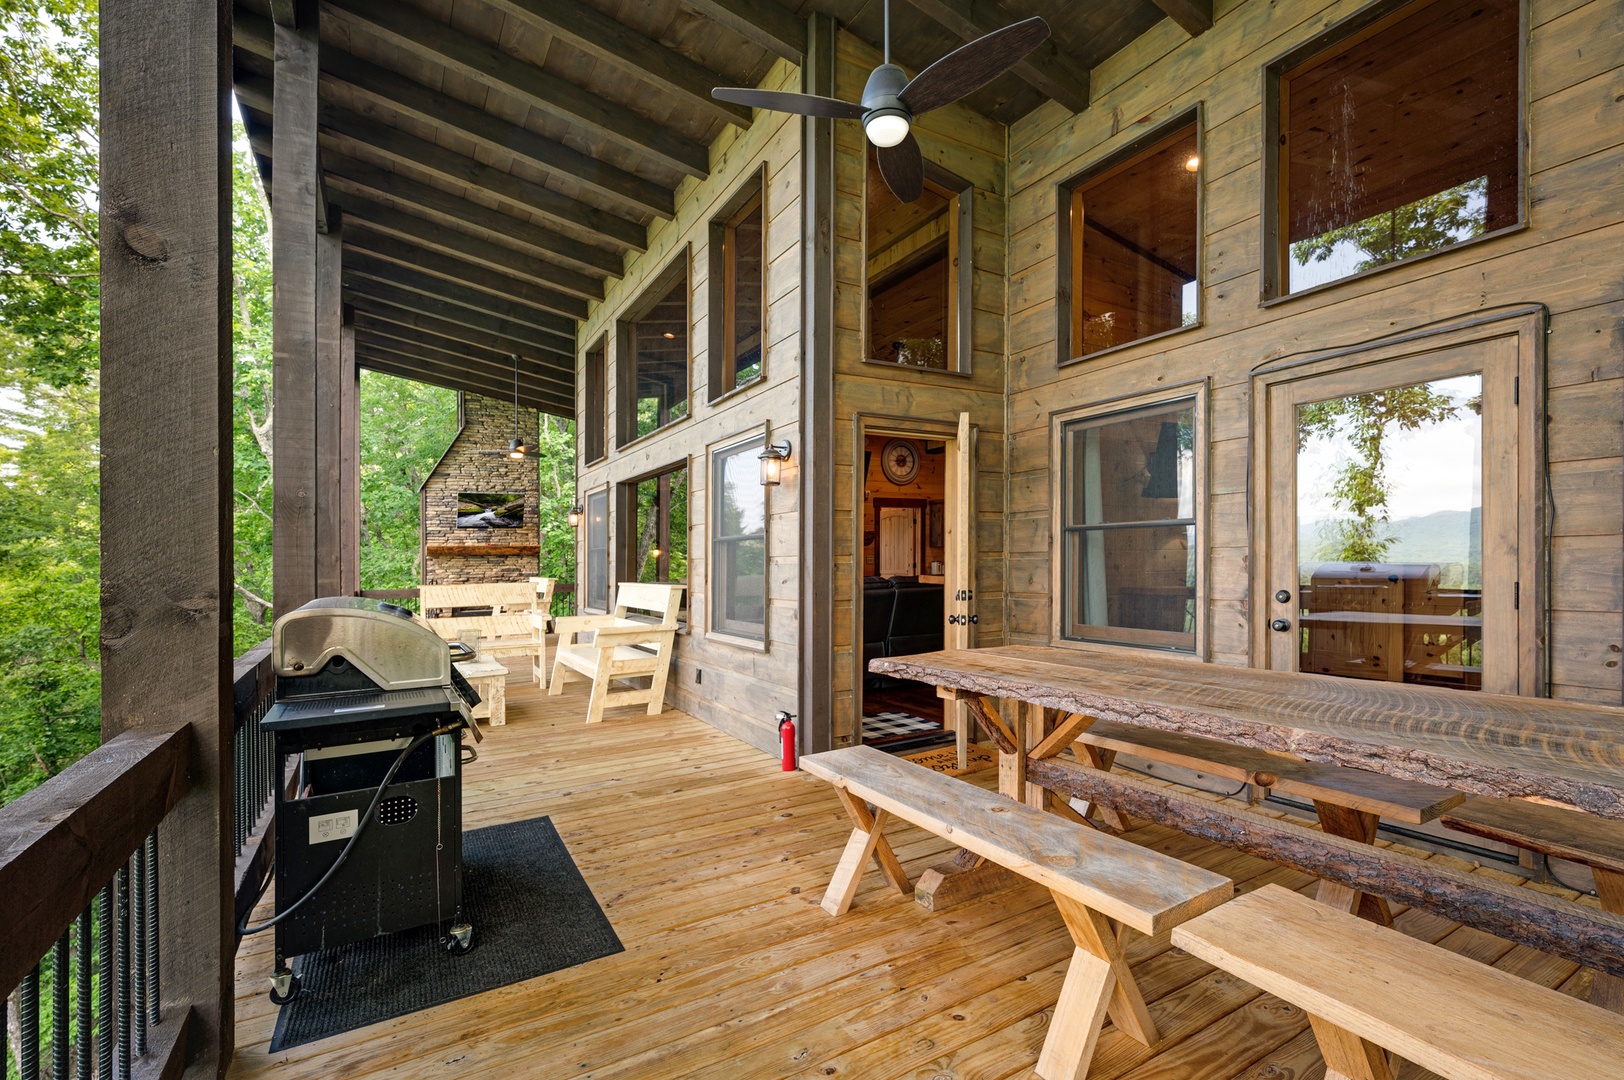 Feather & Fawn Lodge- Upper deck outdoor dining area with a grill and cabin access